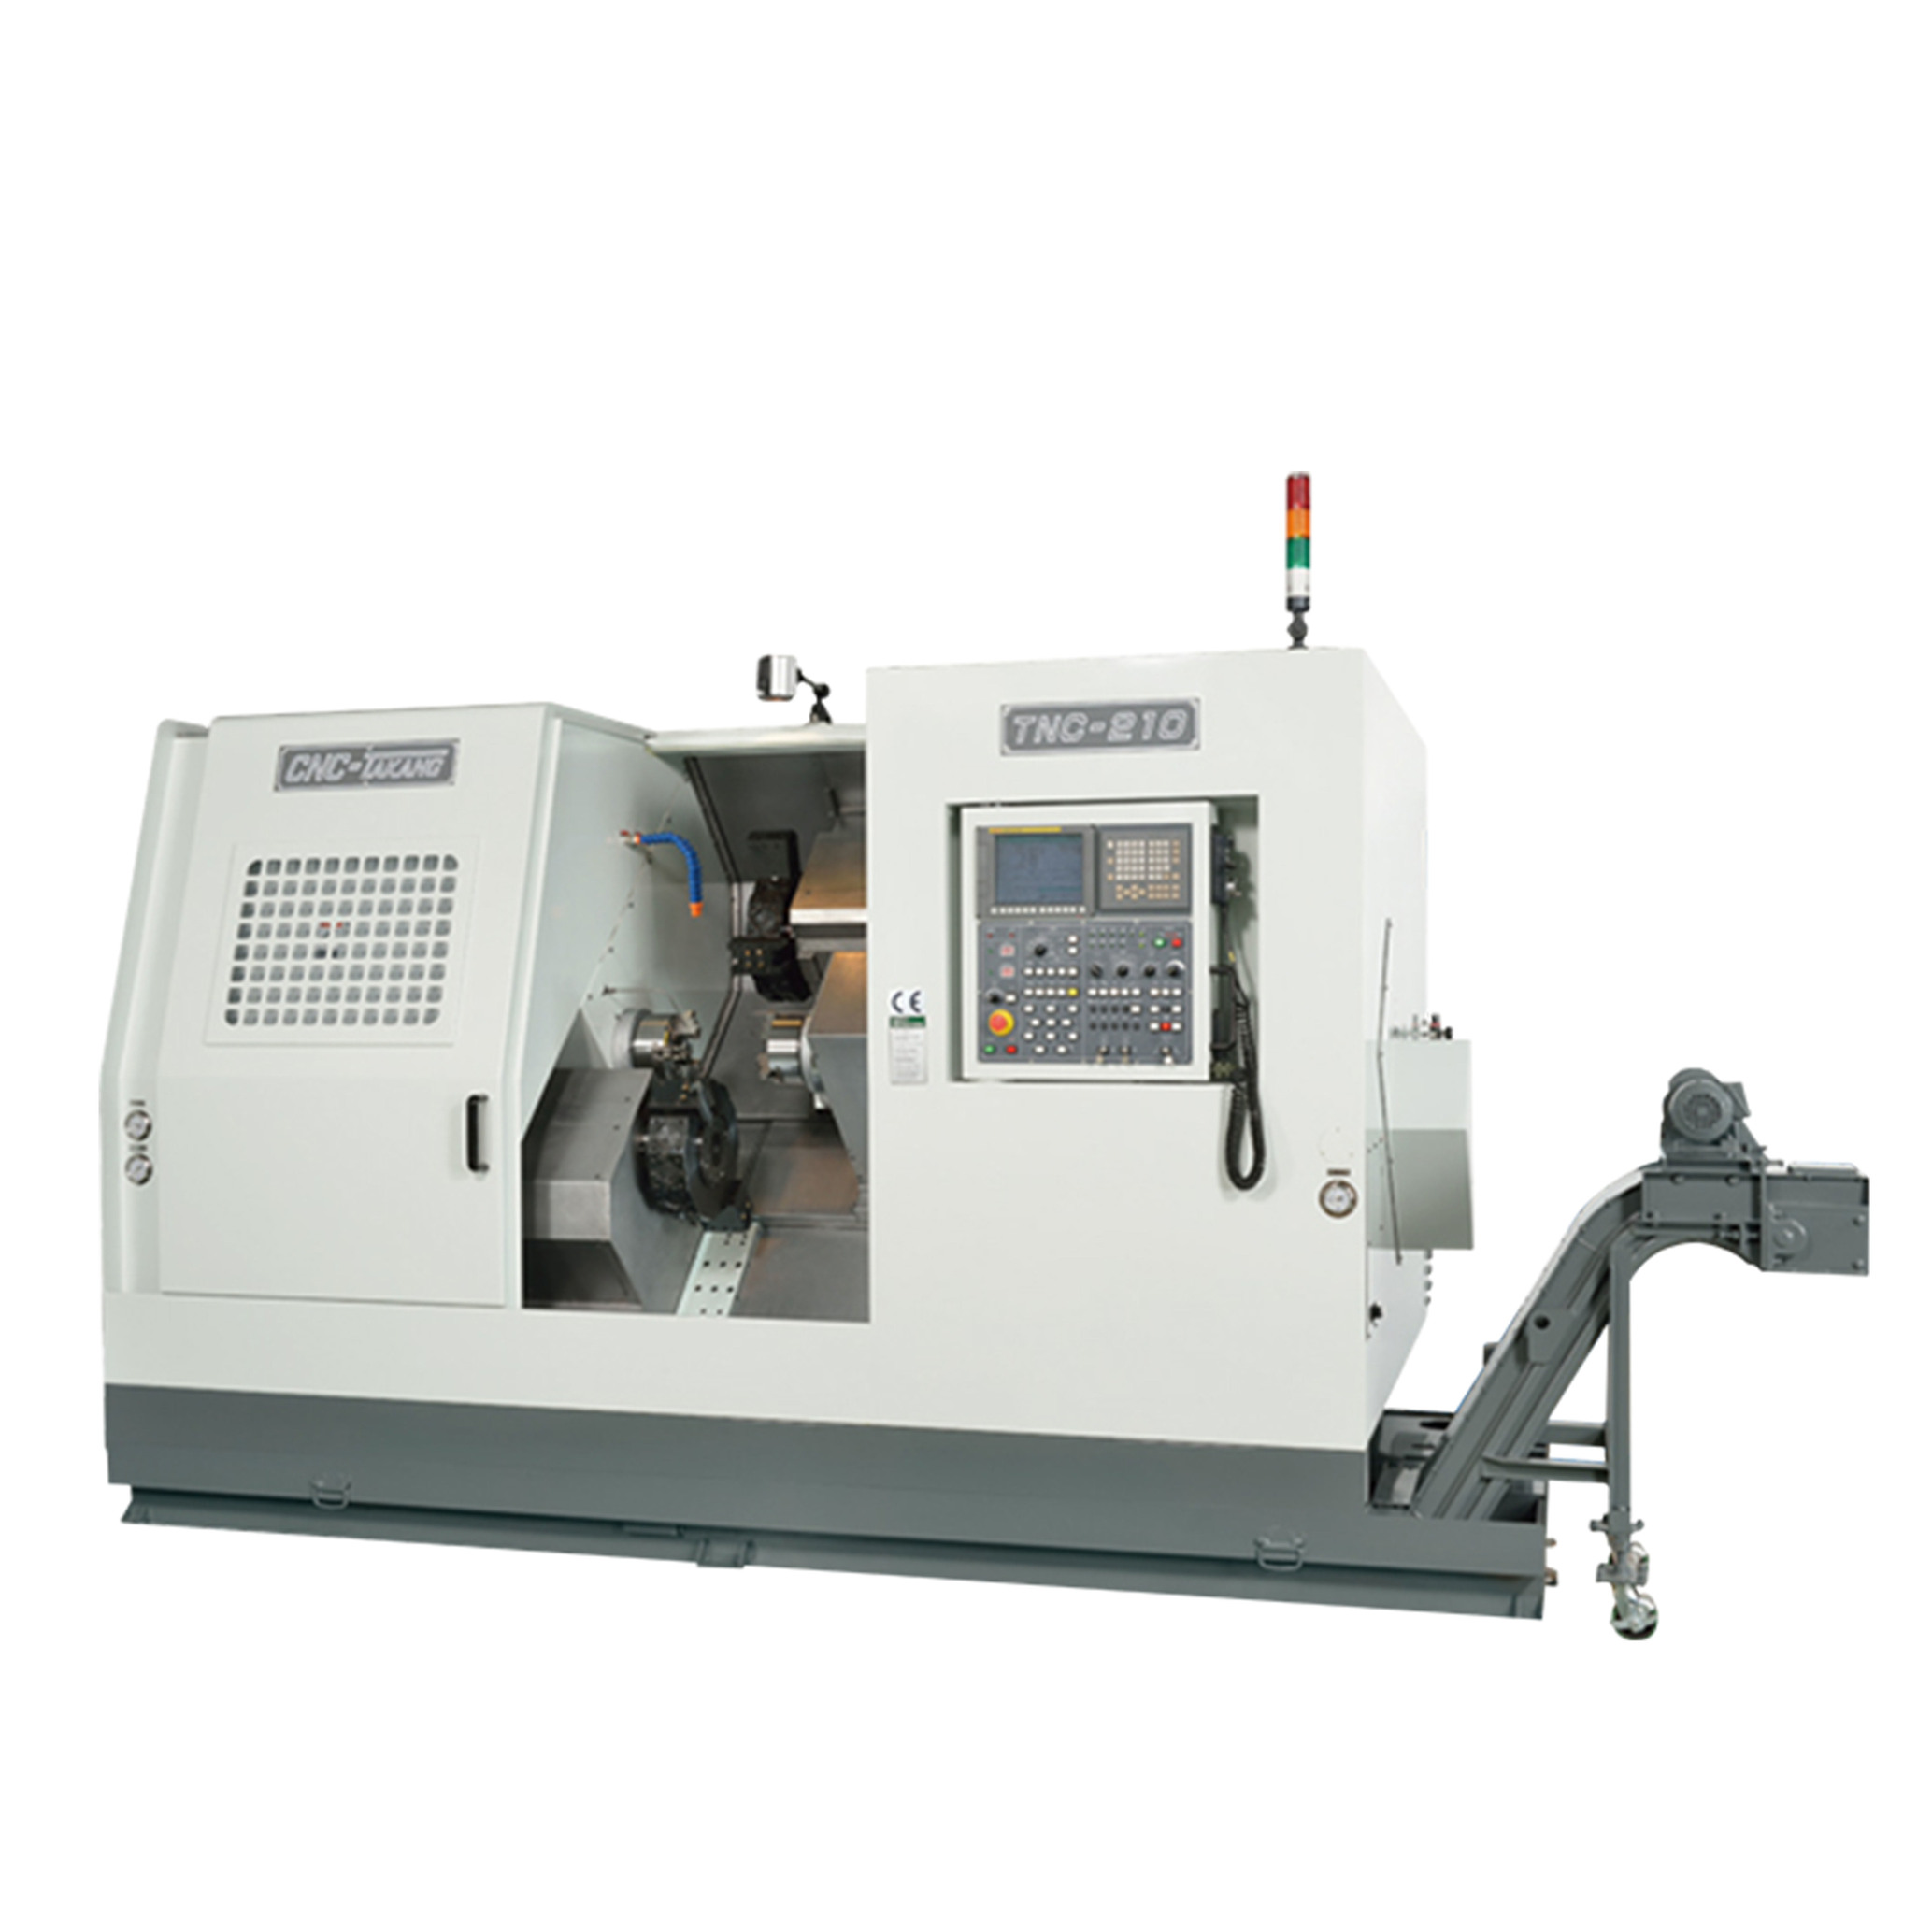 High Speed, Compact CNC Lathe(Single Spindle ／ Twin Turret)-TNC-210DT